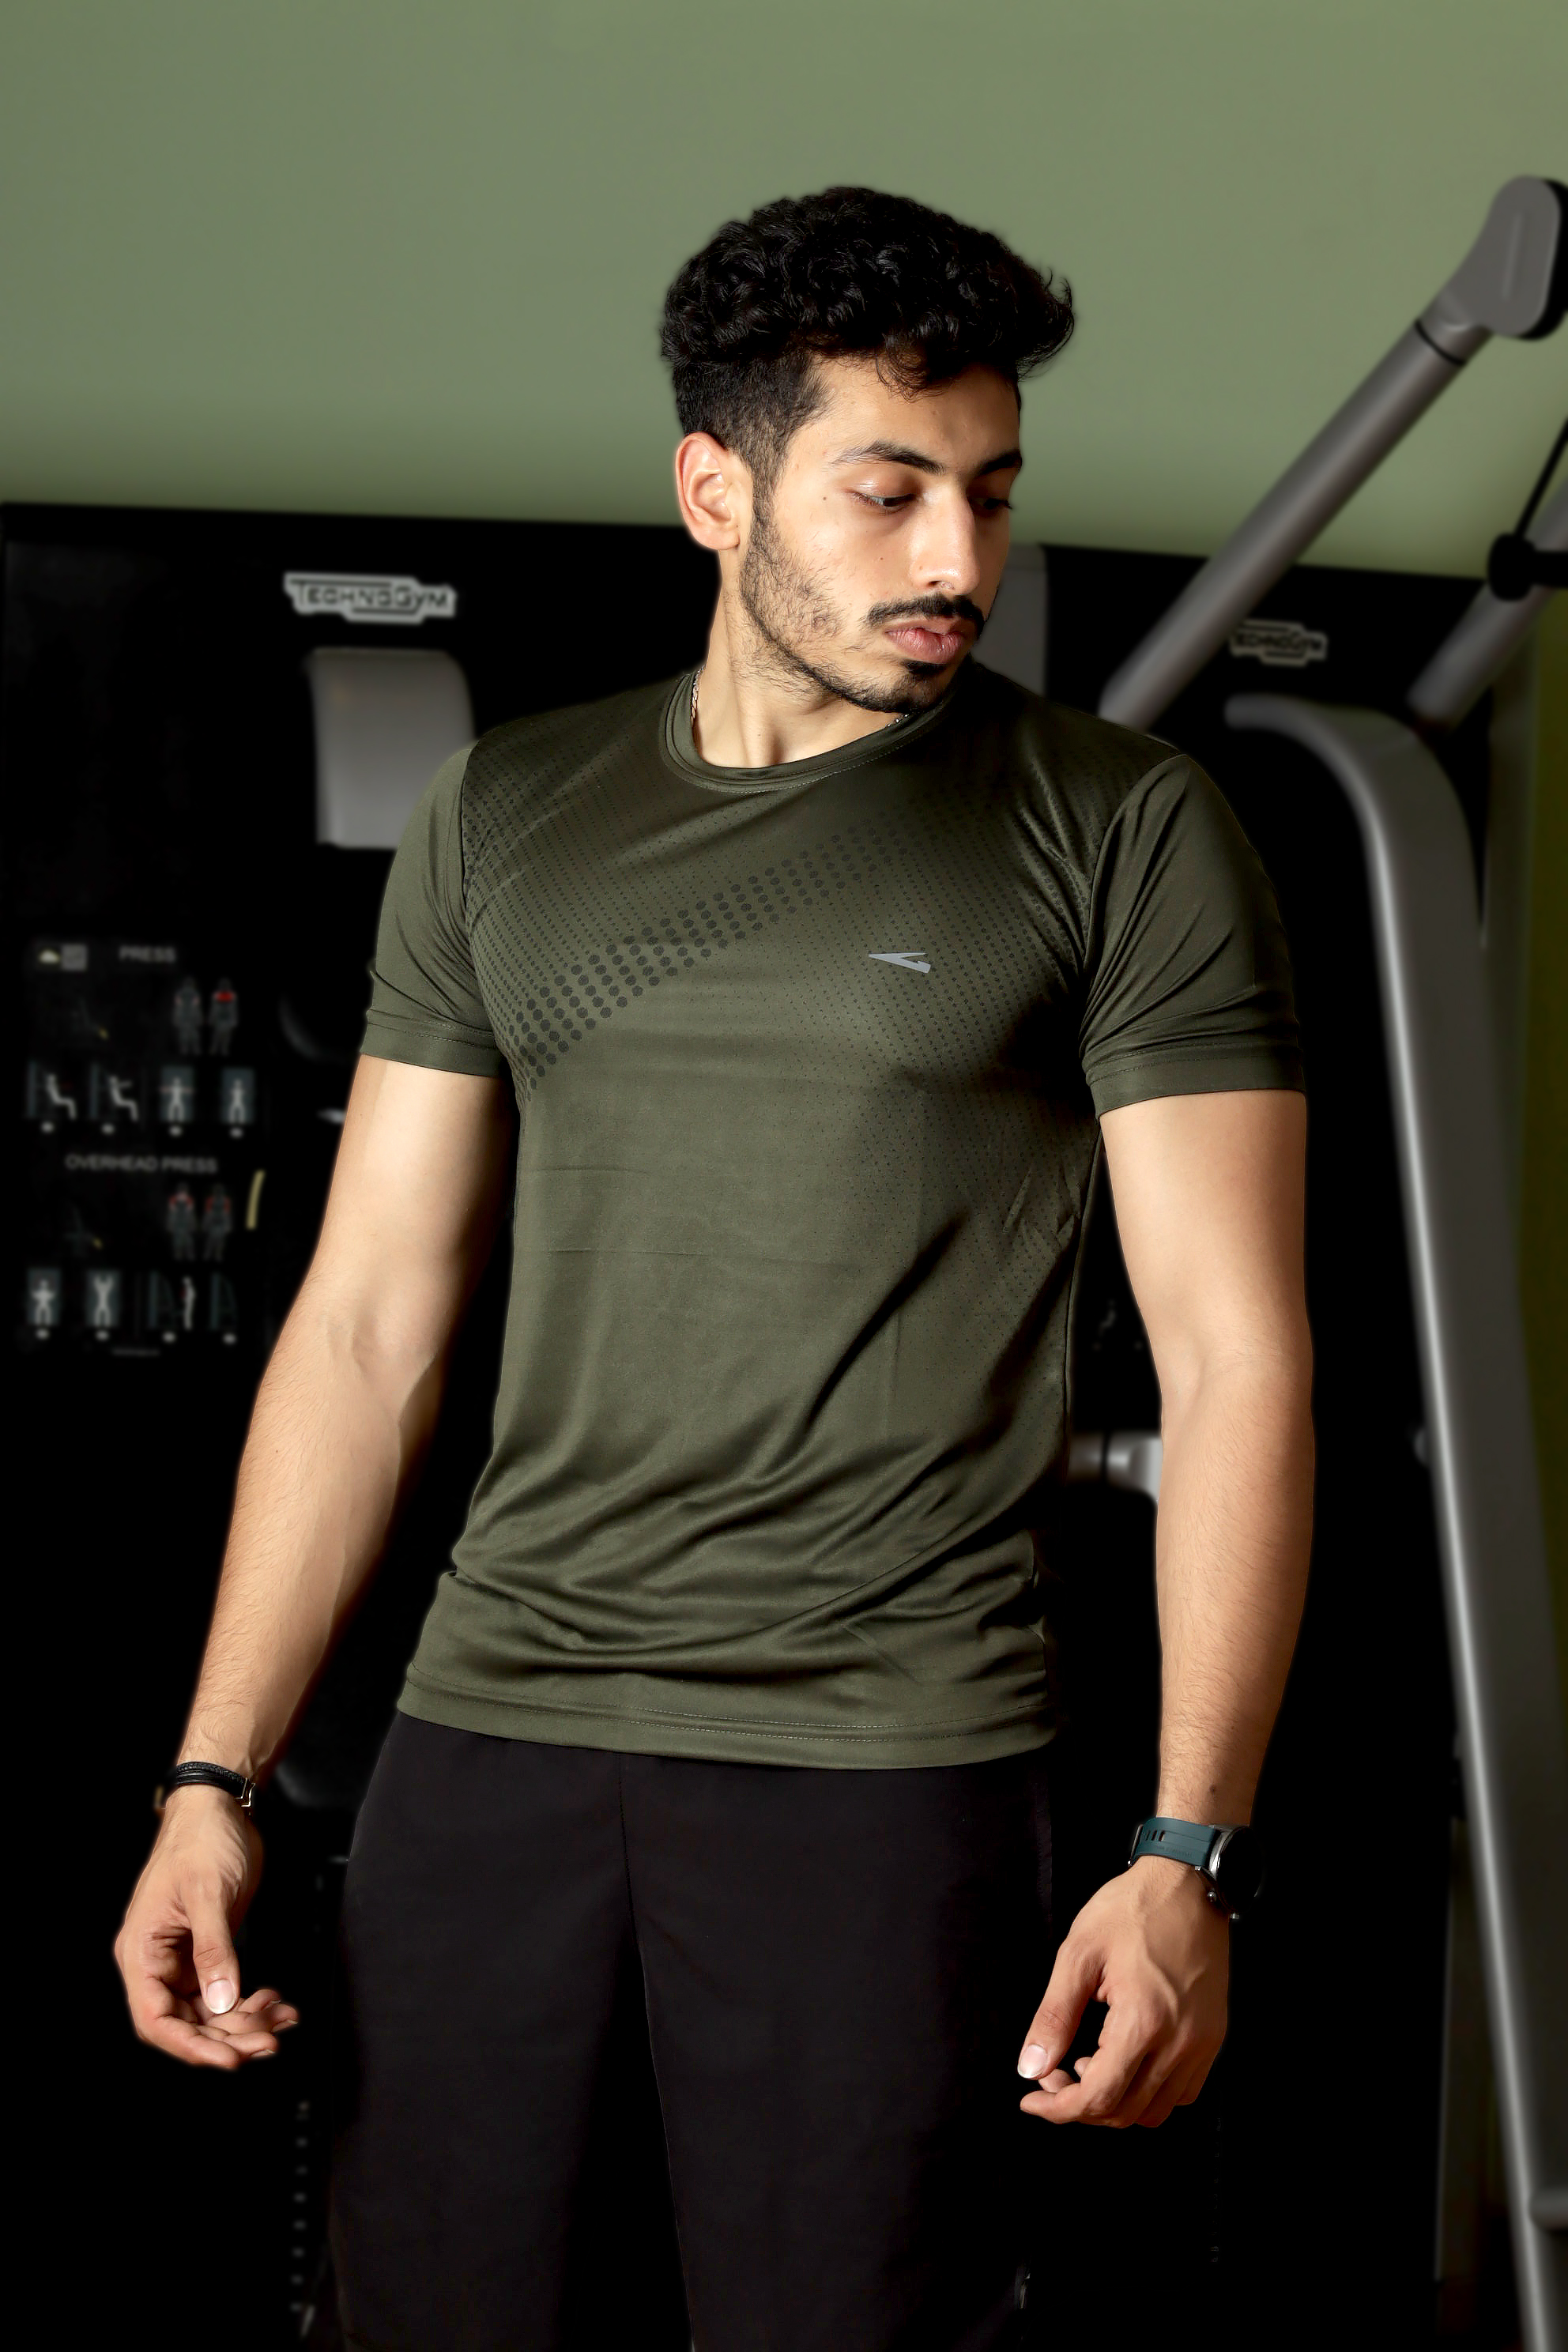 Minora Sport T-shirt  for Men Active Quick Dry Basic Compression